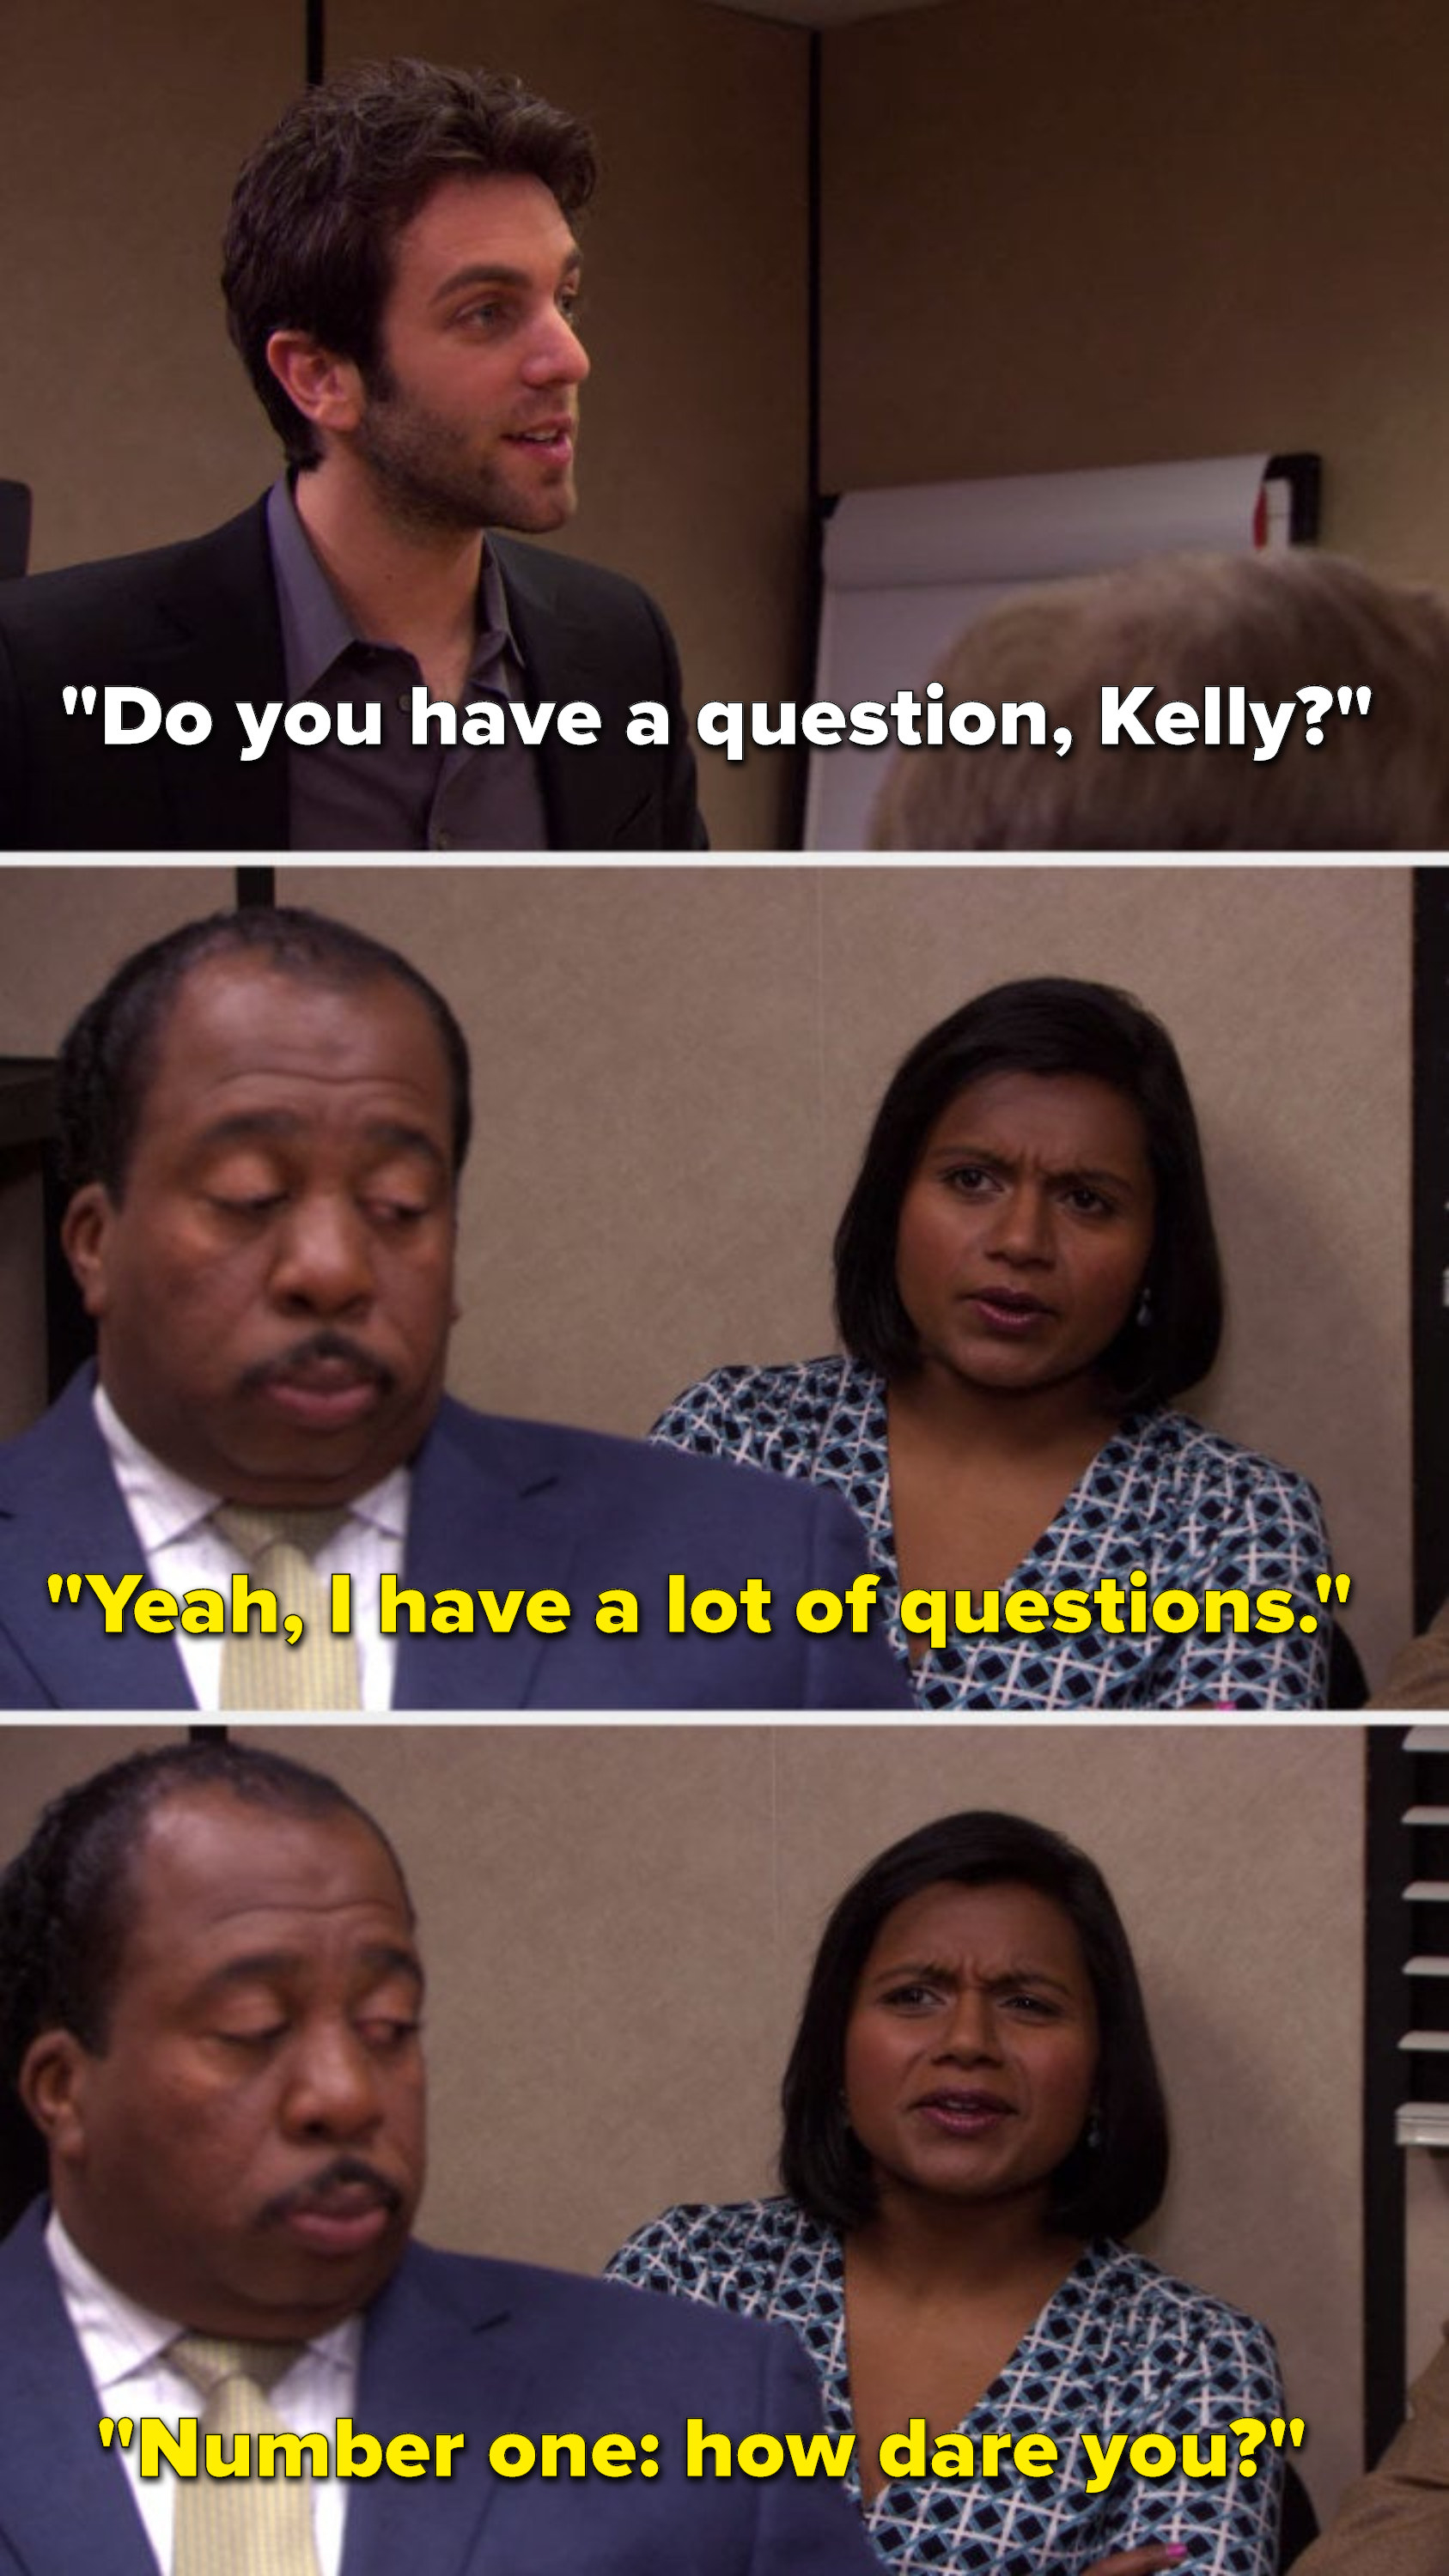 Ryan says, Do you have a question, Kelly, and Kelly says, Yeah, I have a lot of questions, number one how dare you